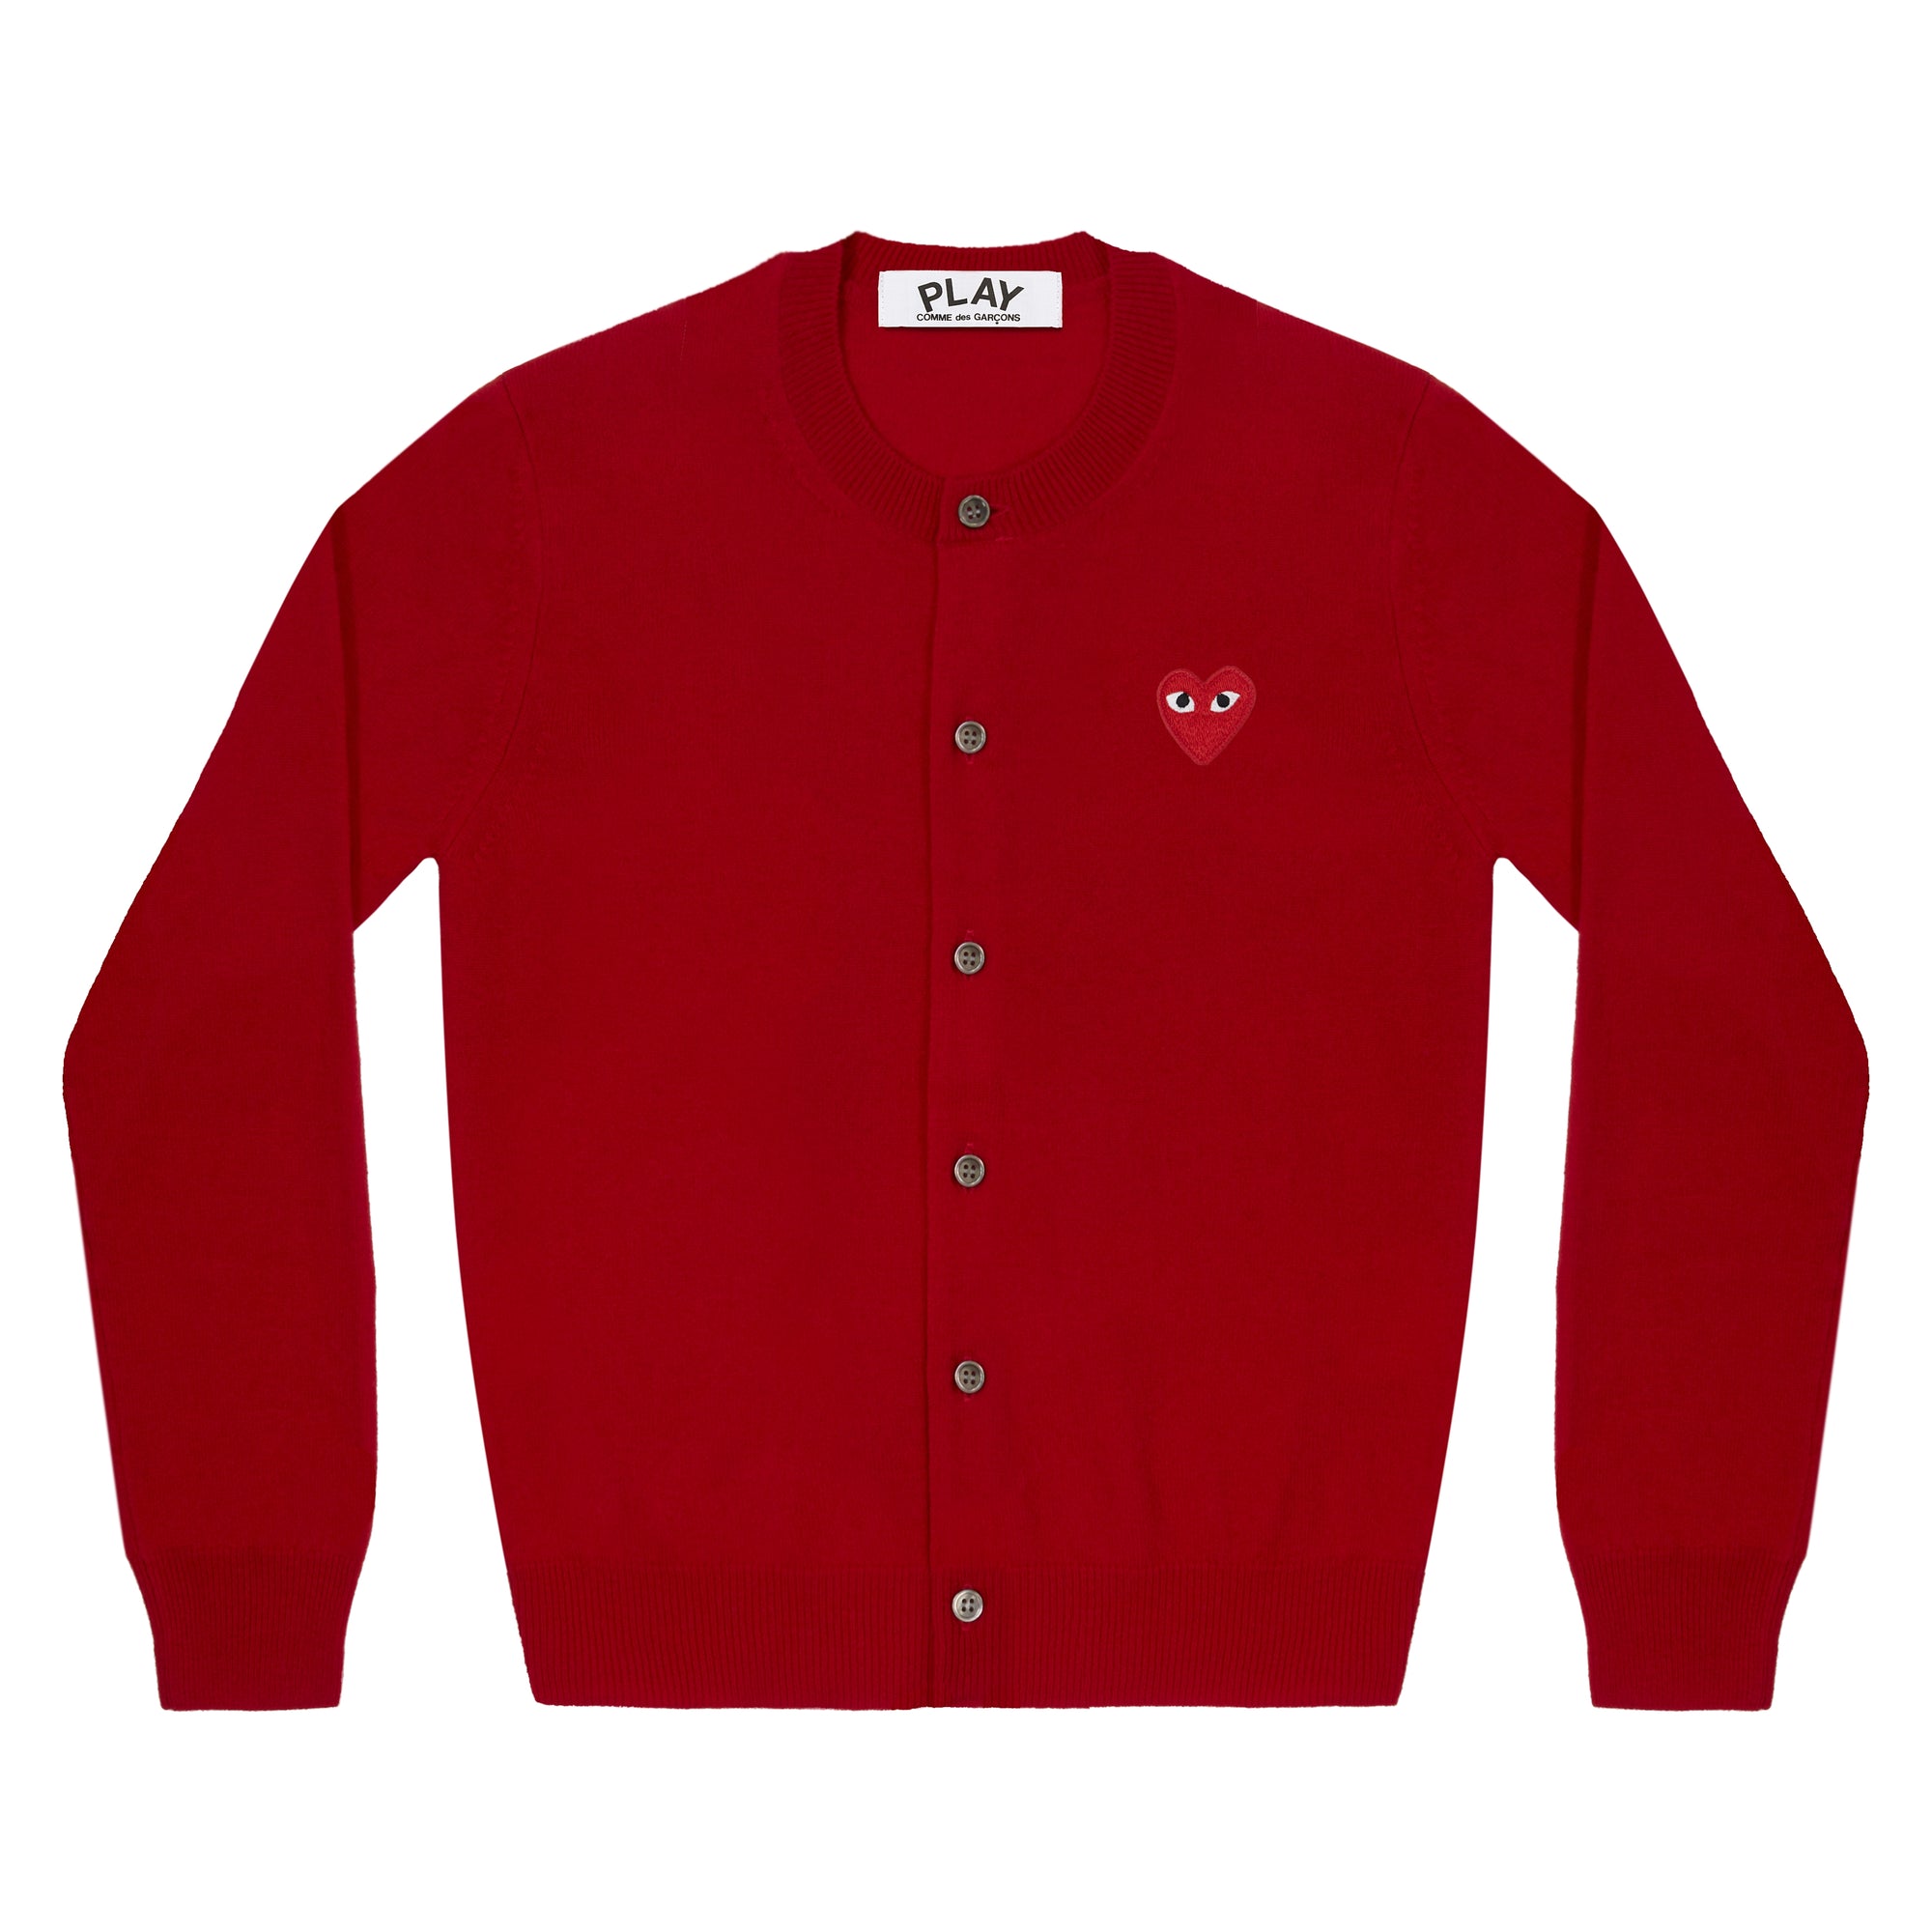 PLAY CDG - RED HEART LADIE'S CARDIGAN - (RED) view 1